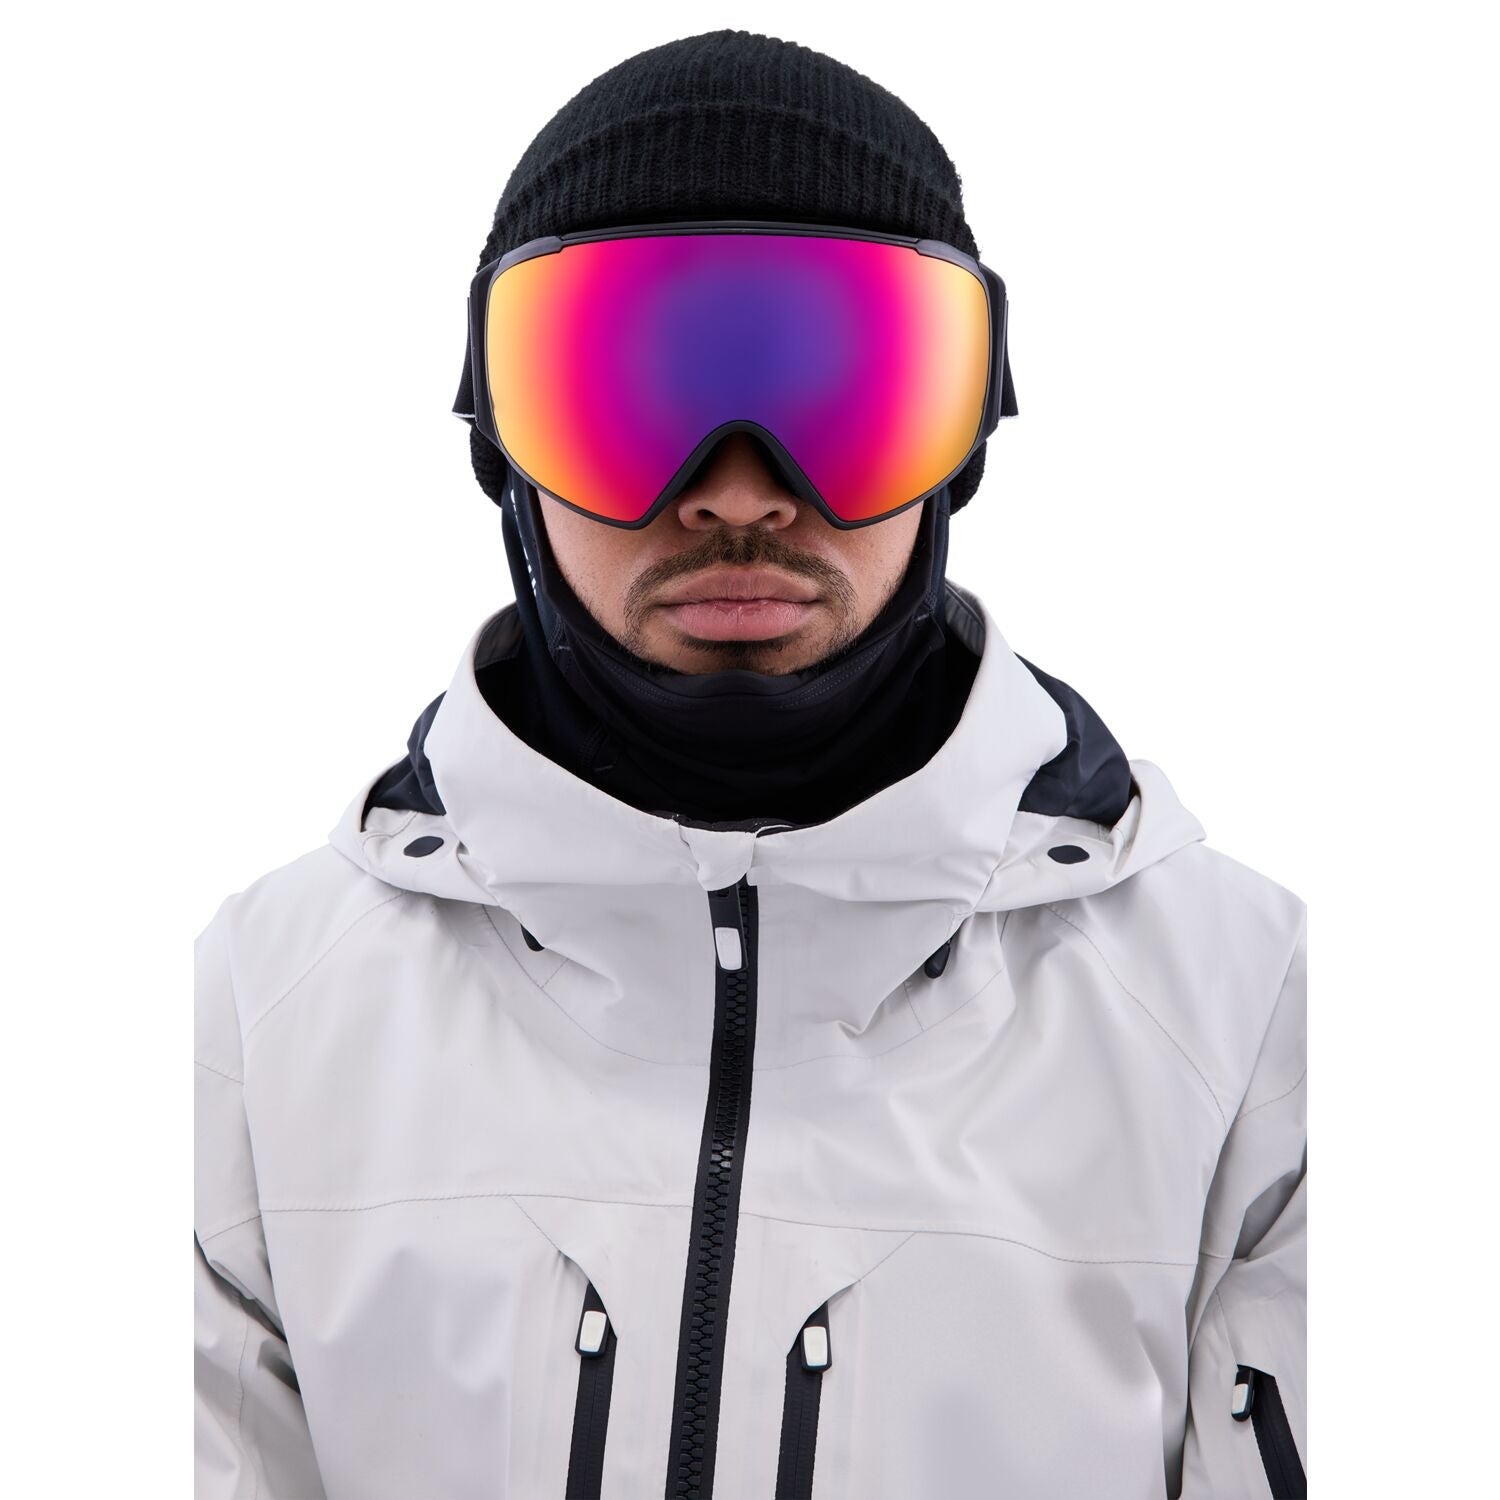 ANON M4S Toric Black - Perceive Sunny Red + Perceive Cloudy Burst + MFI Facemask Snow Goggles Snow Goggles Anon 